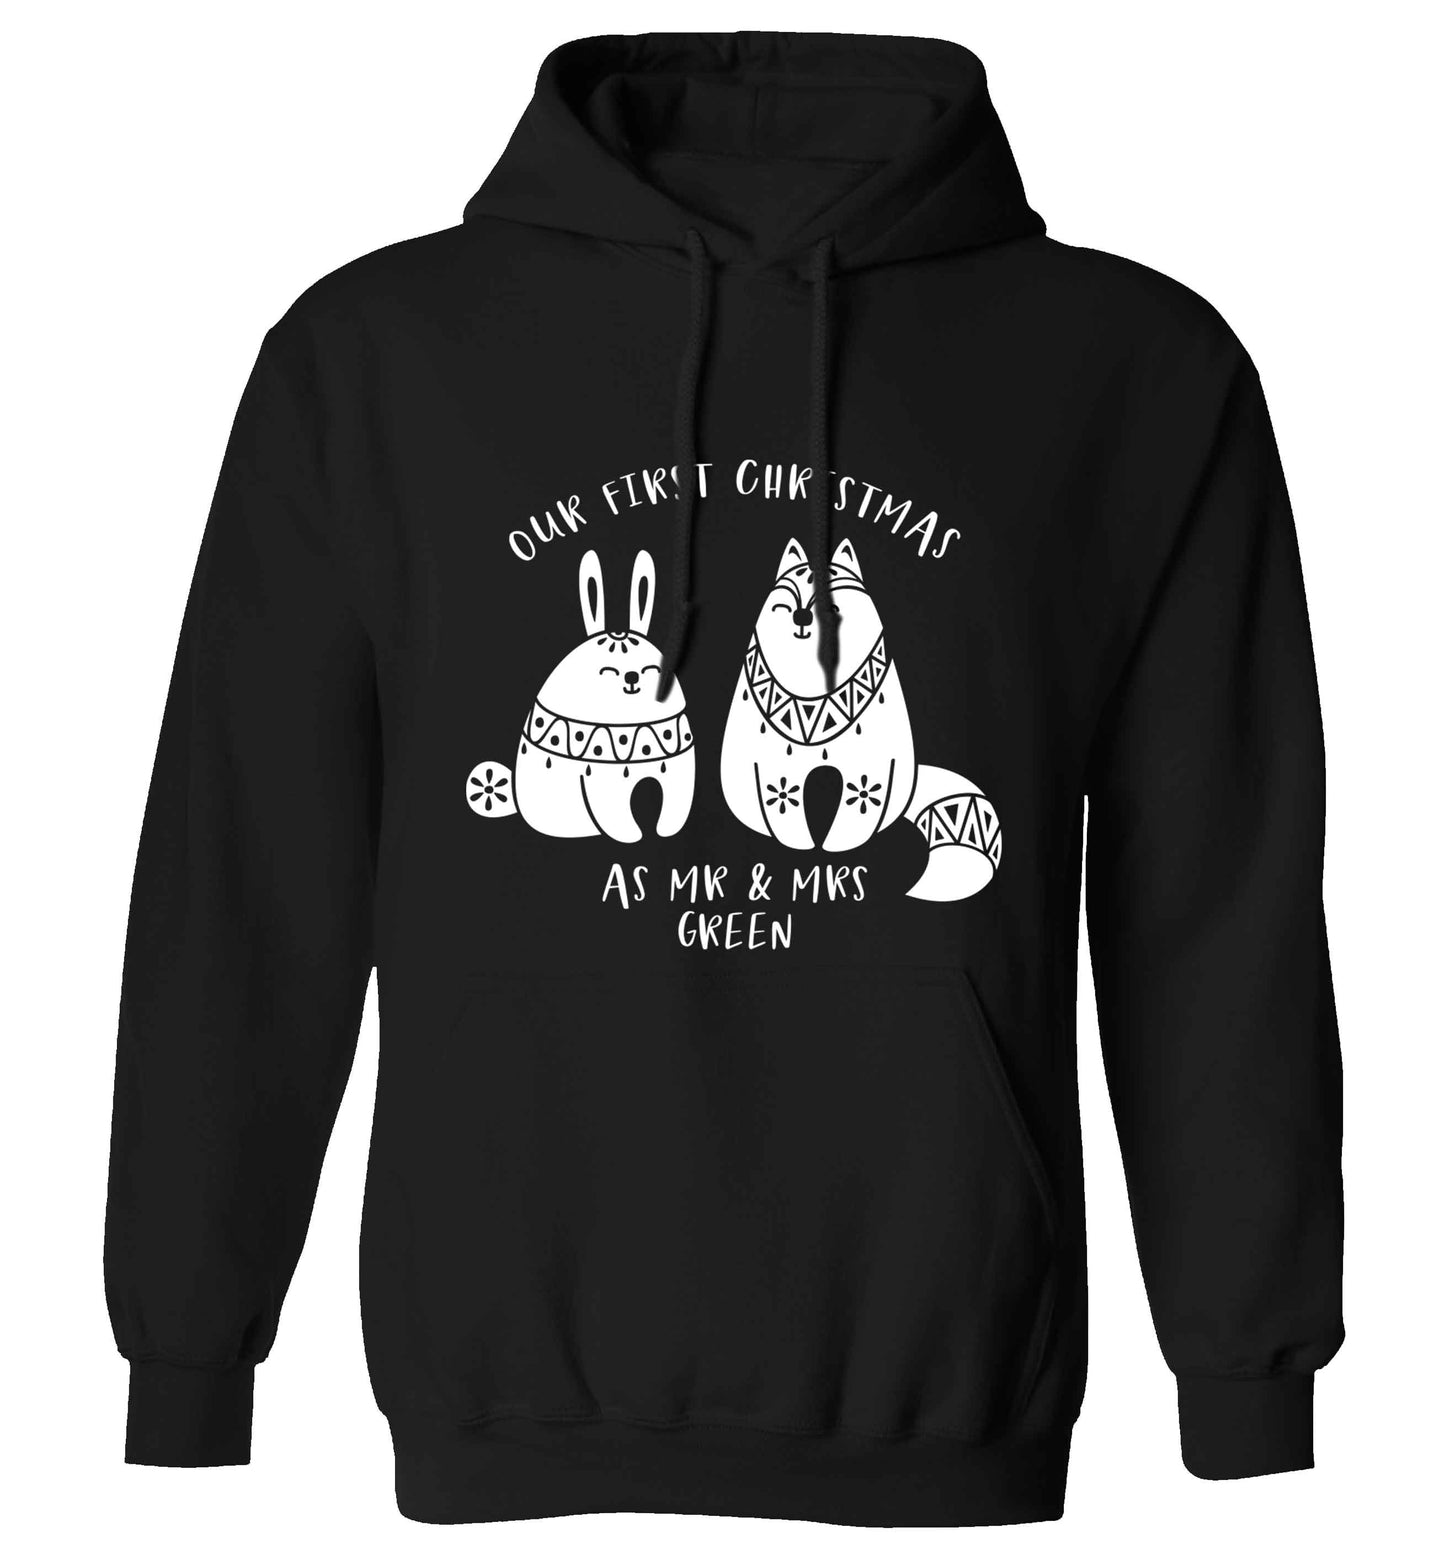 Our first Christmas as Mr & Mrs personalised adults unisex black hoodie 2XL